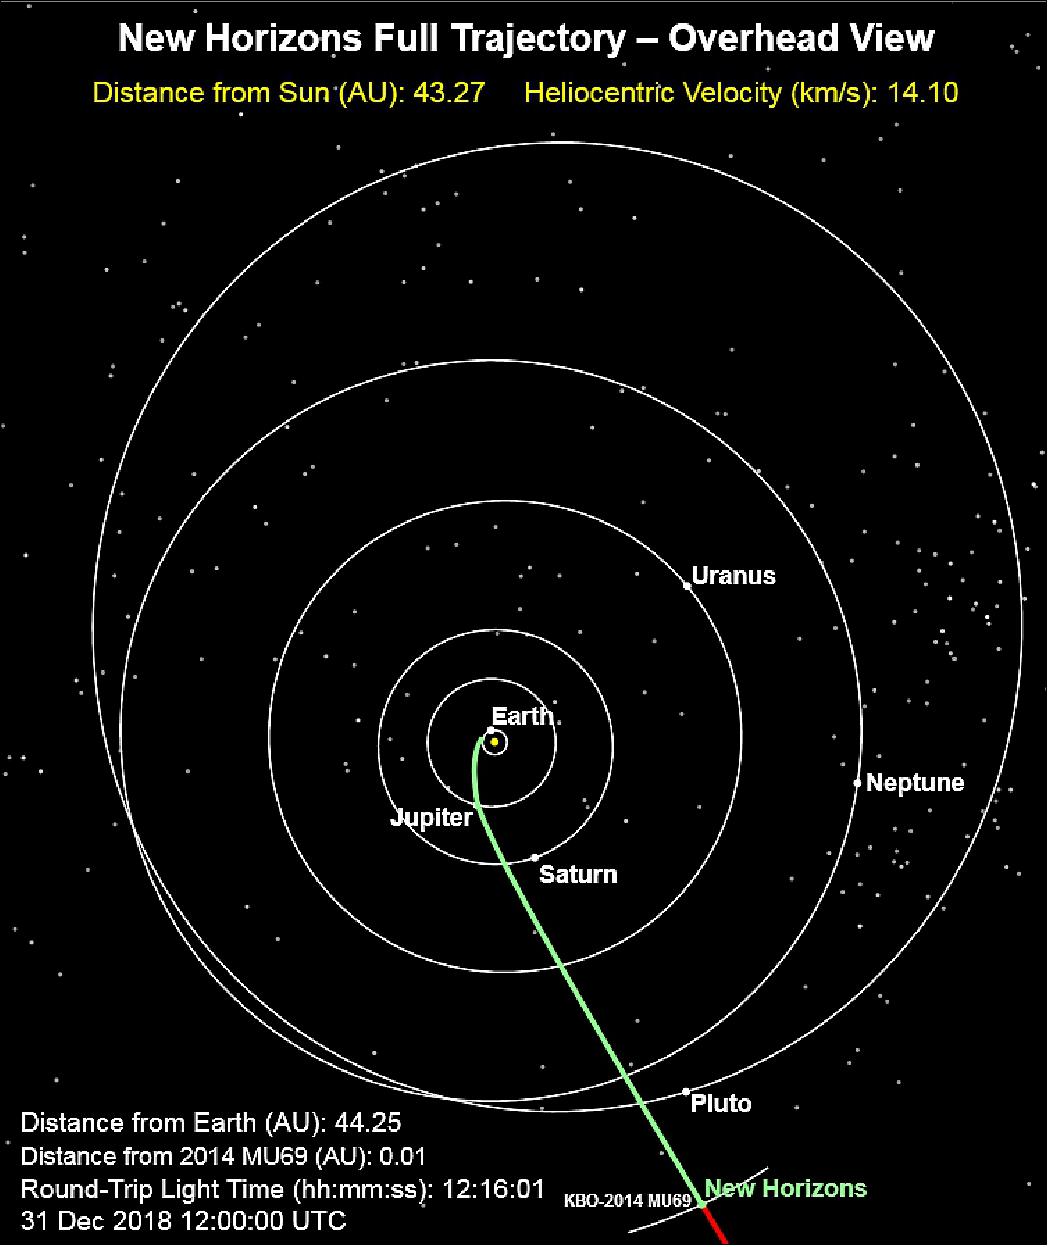 Figure 47: Full trajectory: overhead view: This image shows New Horizons' current position along its full planned trajectory. The green segment of the line shows where New Horizons has traveled since launch; the red indicates the spacecraft's future path. Positions of stars with magnitude 12 or brighter are shown from this perspective, which is above the Sun and "north" of Earth's orbit (image credit: JHU/APL, NASA, SwRI)